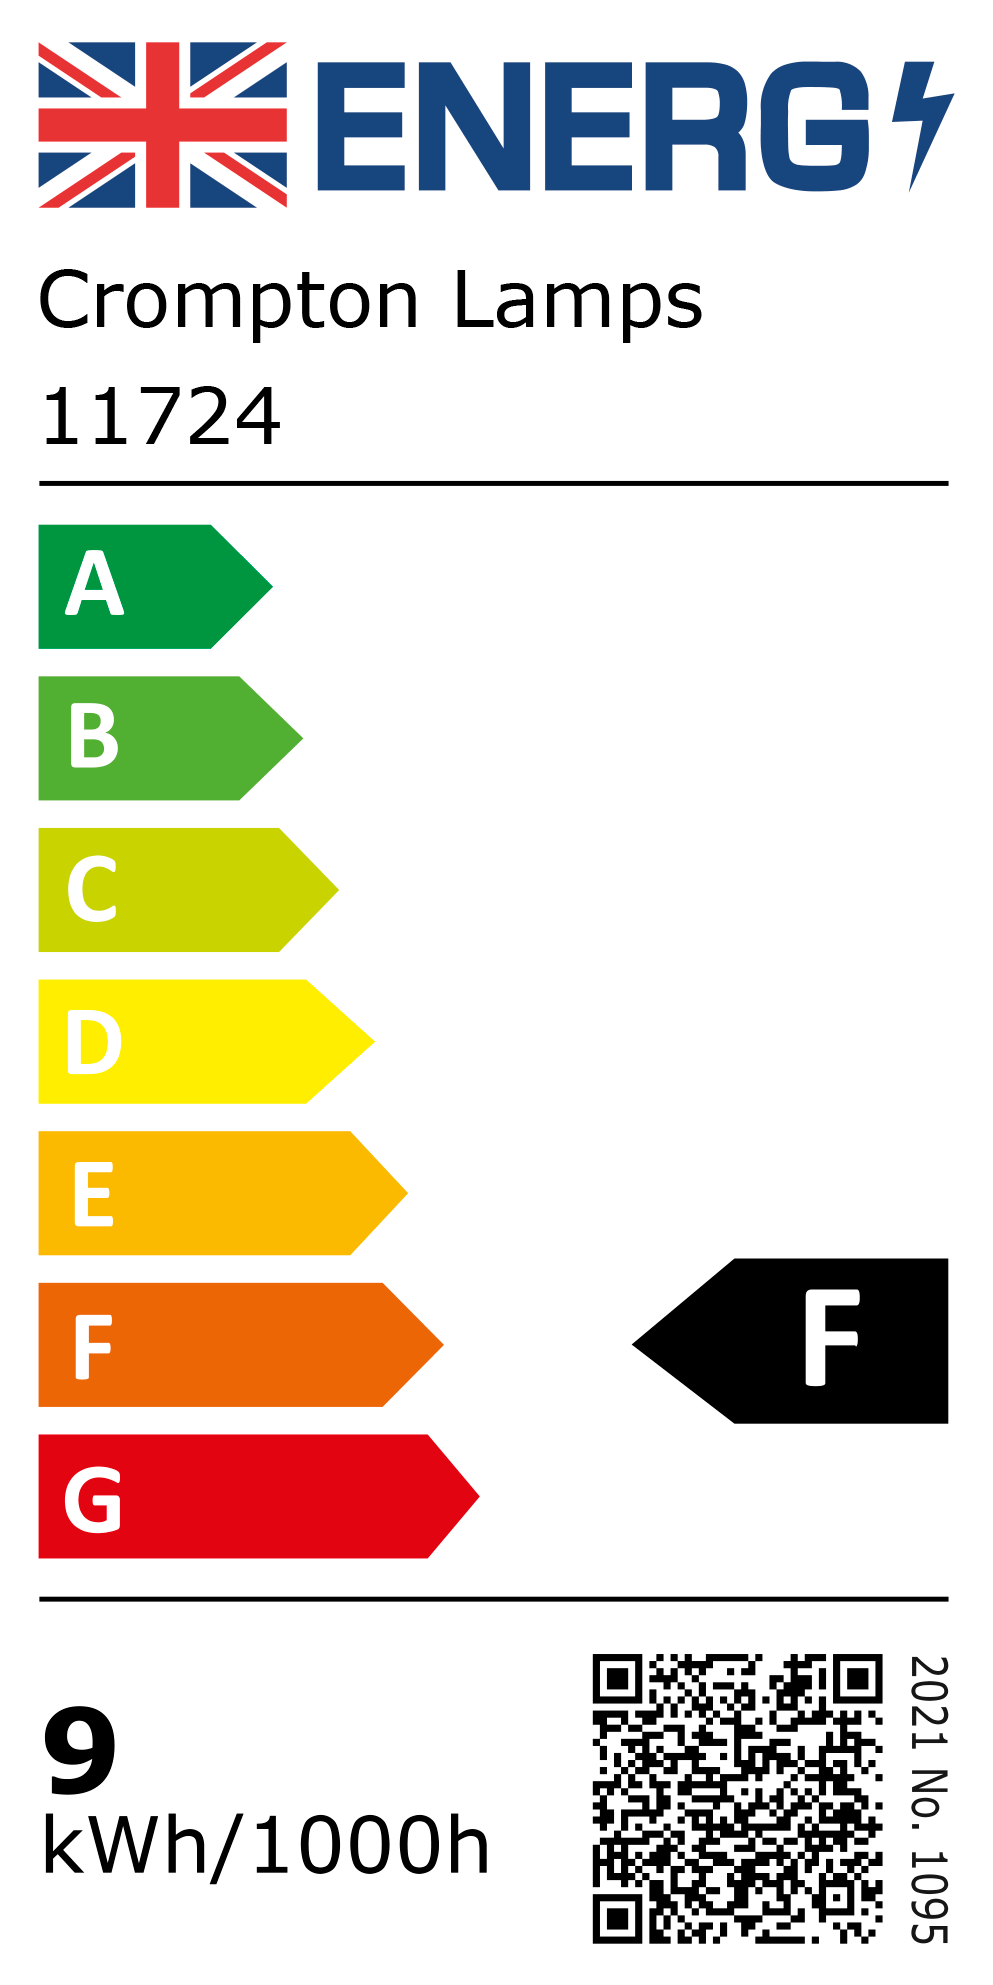 New 2021 Energy Rating Label: Stock Code 11724